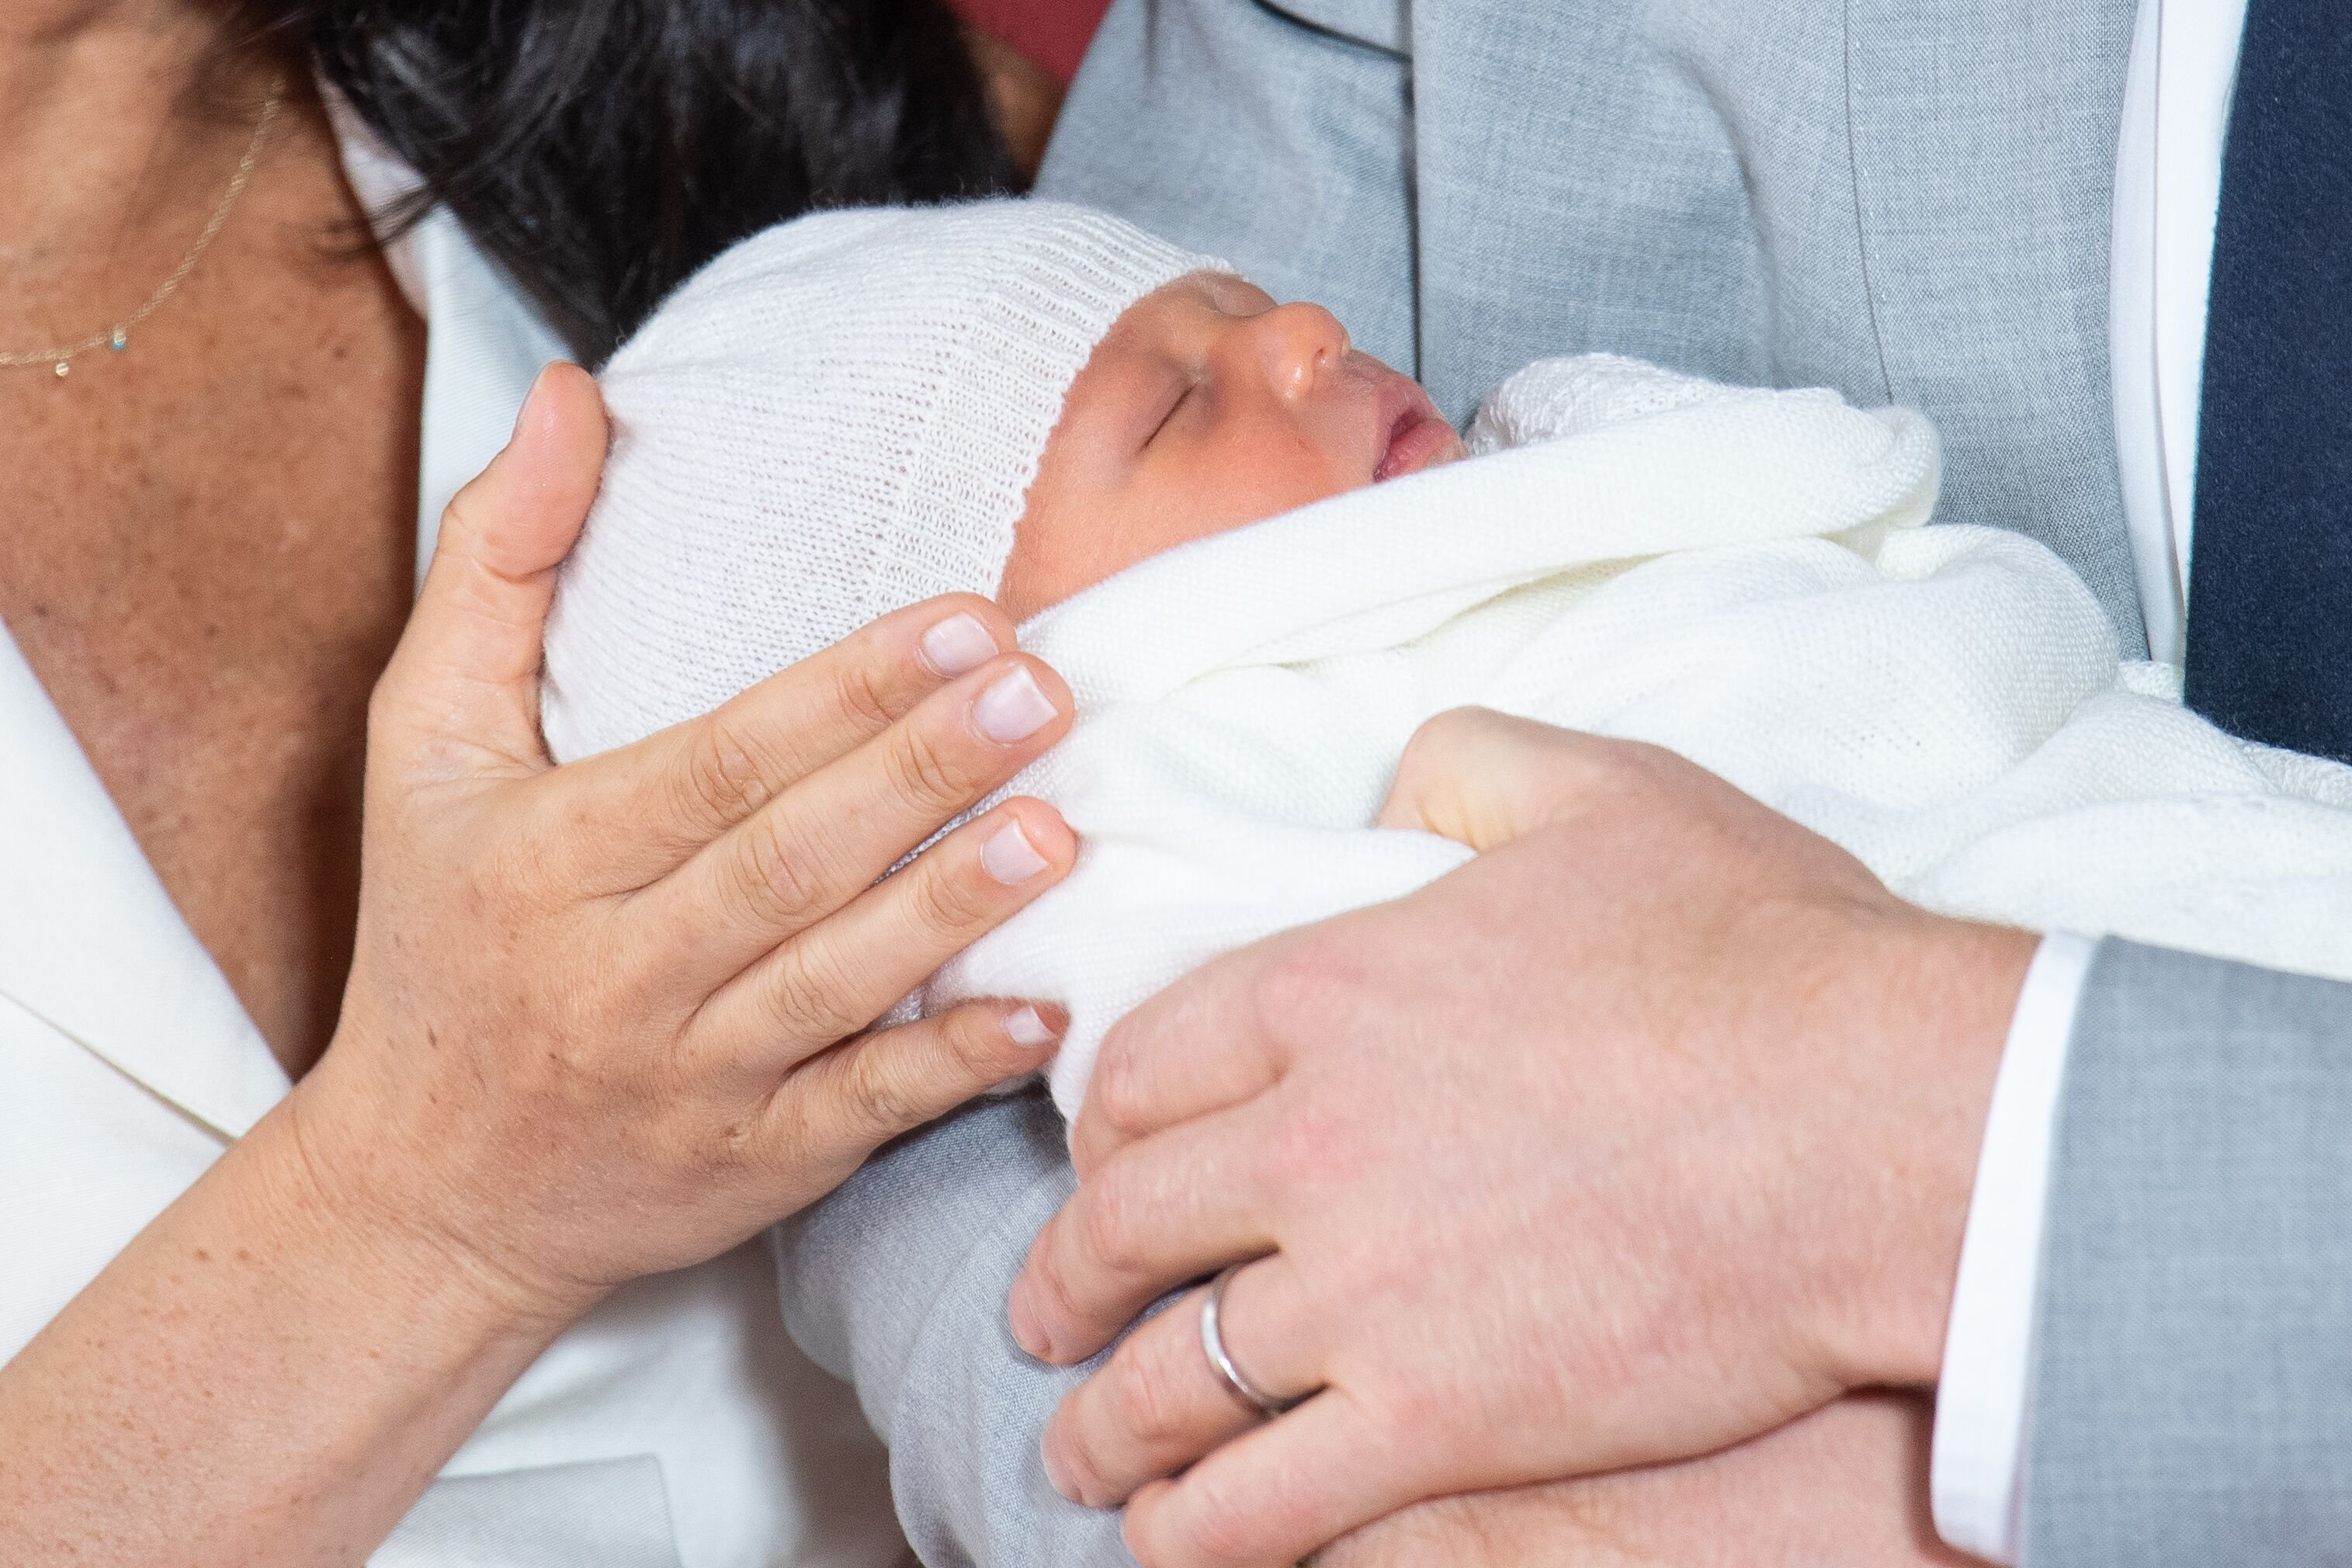 Baby Sussex presented to the world for the first time. | Source: Getty Images